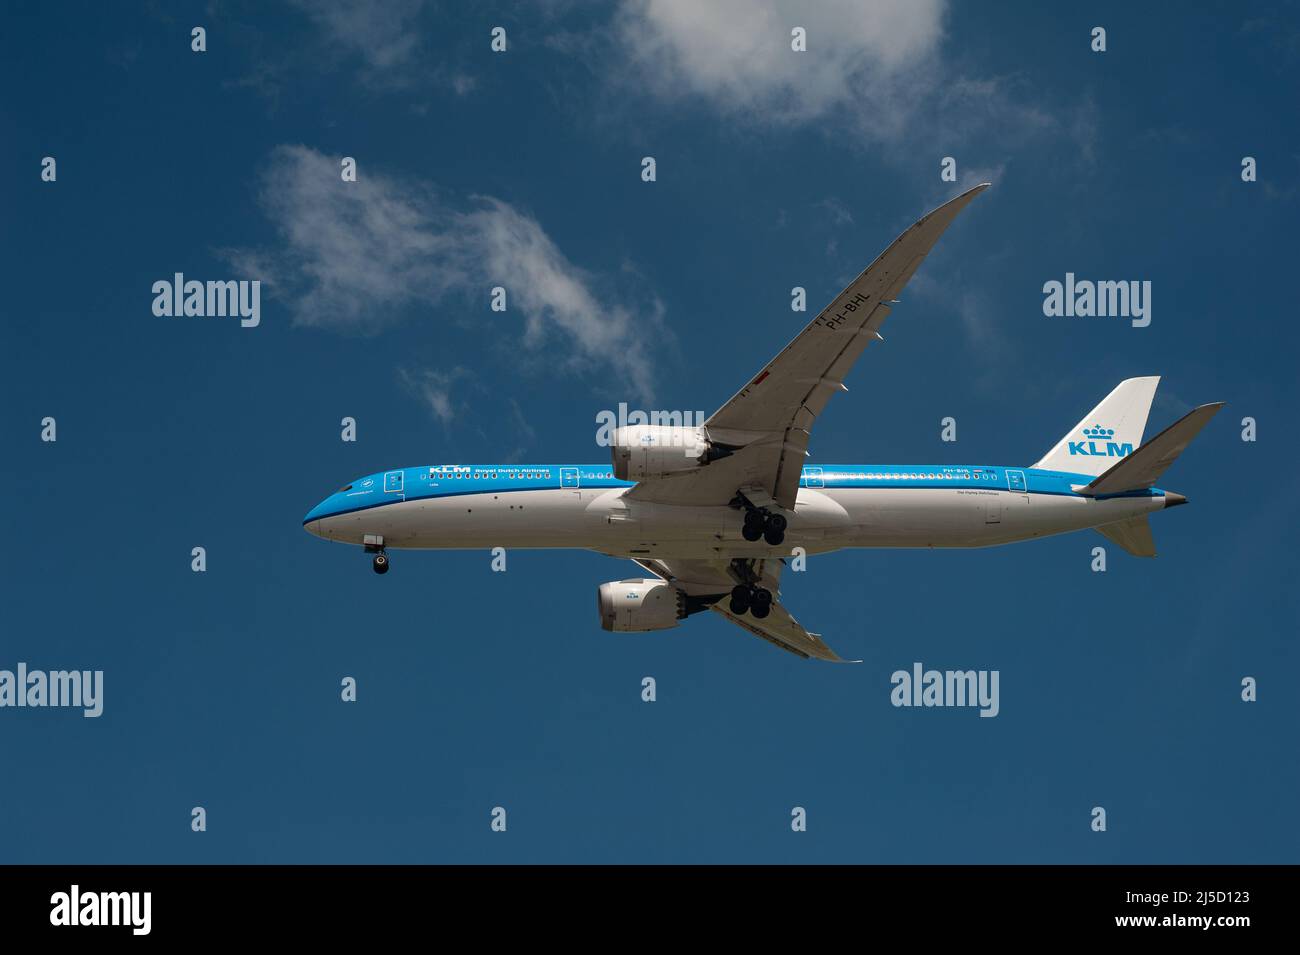 Apr. 07, 2021, Singapore, Republic of Singapore, Asia - A KLM Boeing 787-9 Dreamliner passenger aircraft, registration PH-BHL, on approach to Changi International Airport during the ongoing Corona crisis. KLM is a member of the SkyTeam airline alliance. [automated translation] Stock Photo